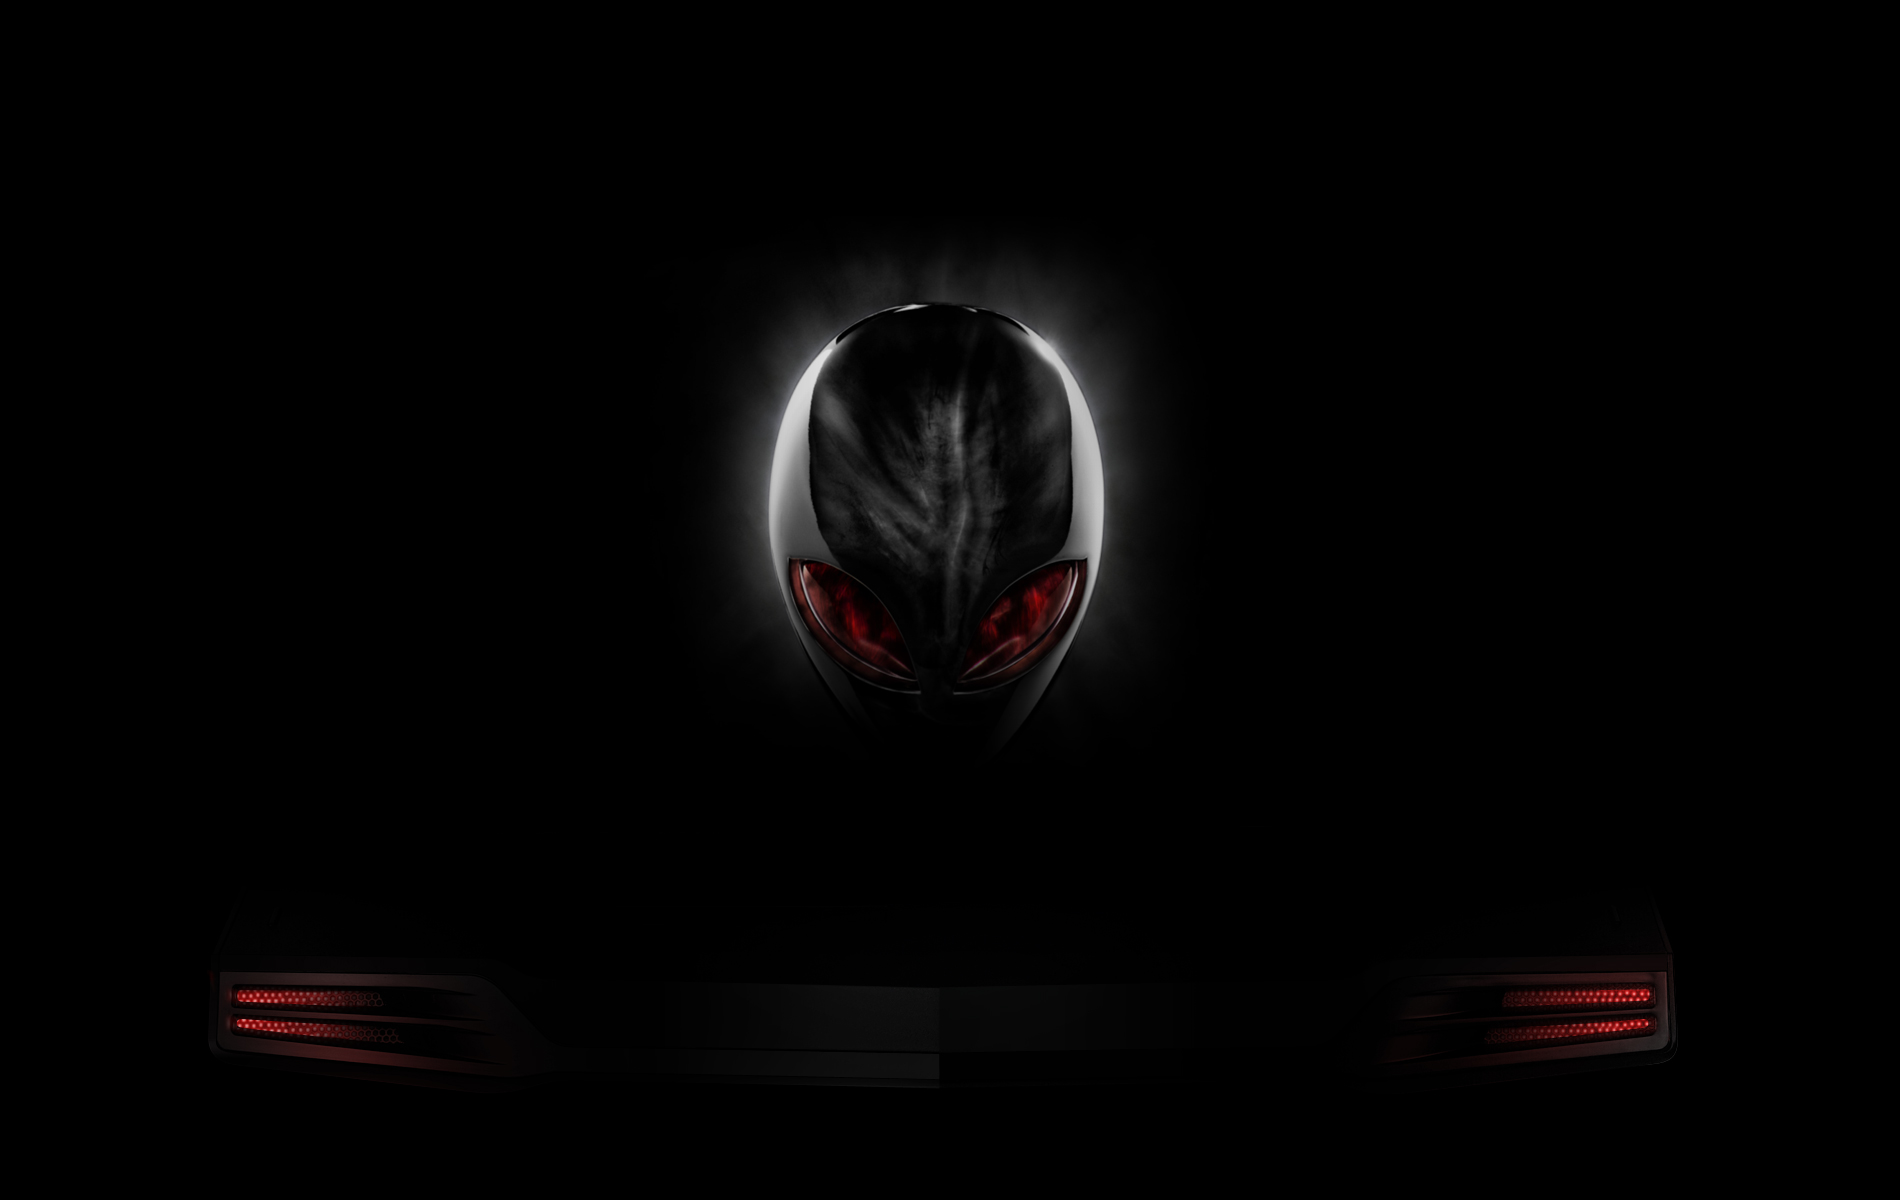 Free download Alienware Wallpapers Pictures Images [1900x1200] for your  Desktop, Mobile & Tablet | Explore 75+ Alienware Hd Wallpapers | Hd  Alienware Wallpapers, Alienware Backgrounds, Alienware Wallpaper Hd